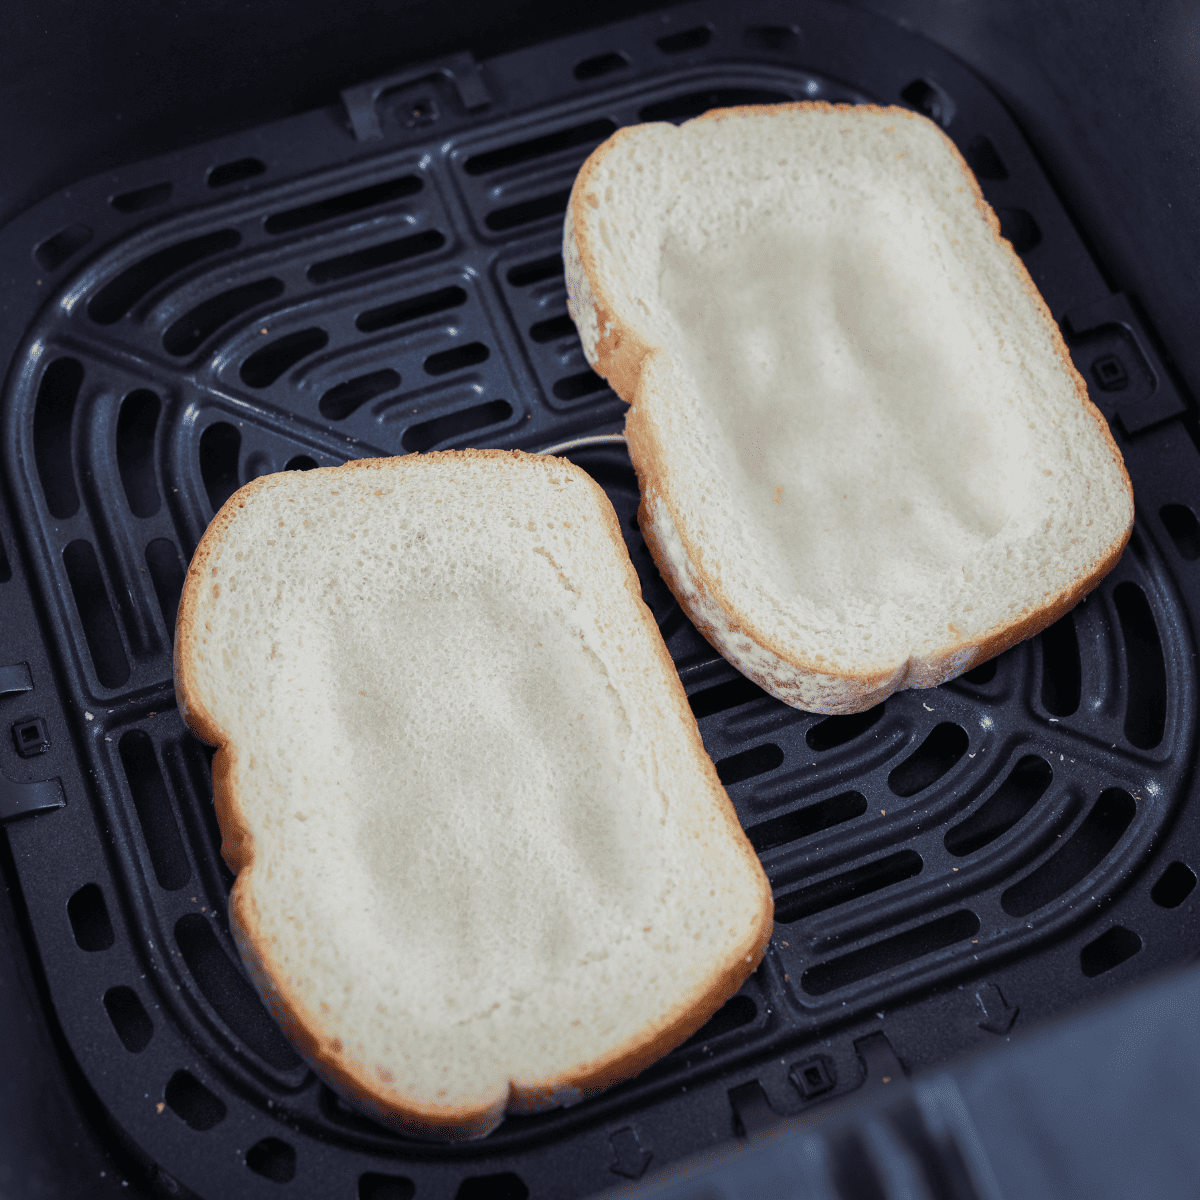 How To Make Egg and Cheese Toast In The Air Fryer